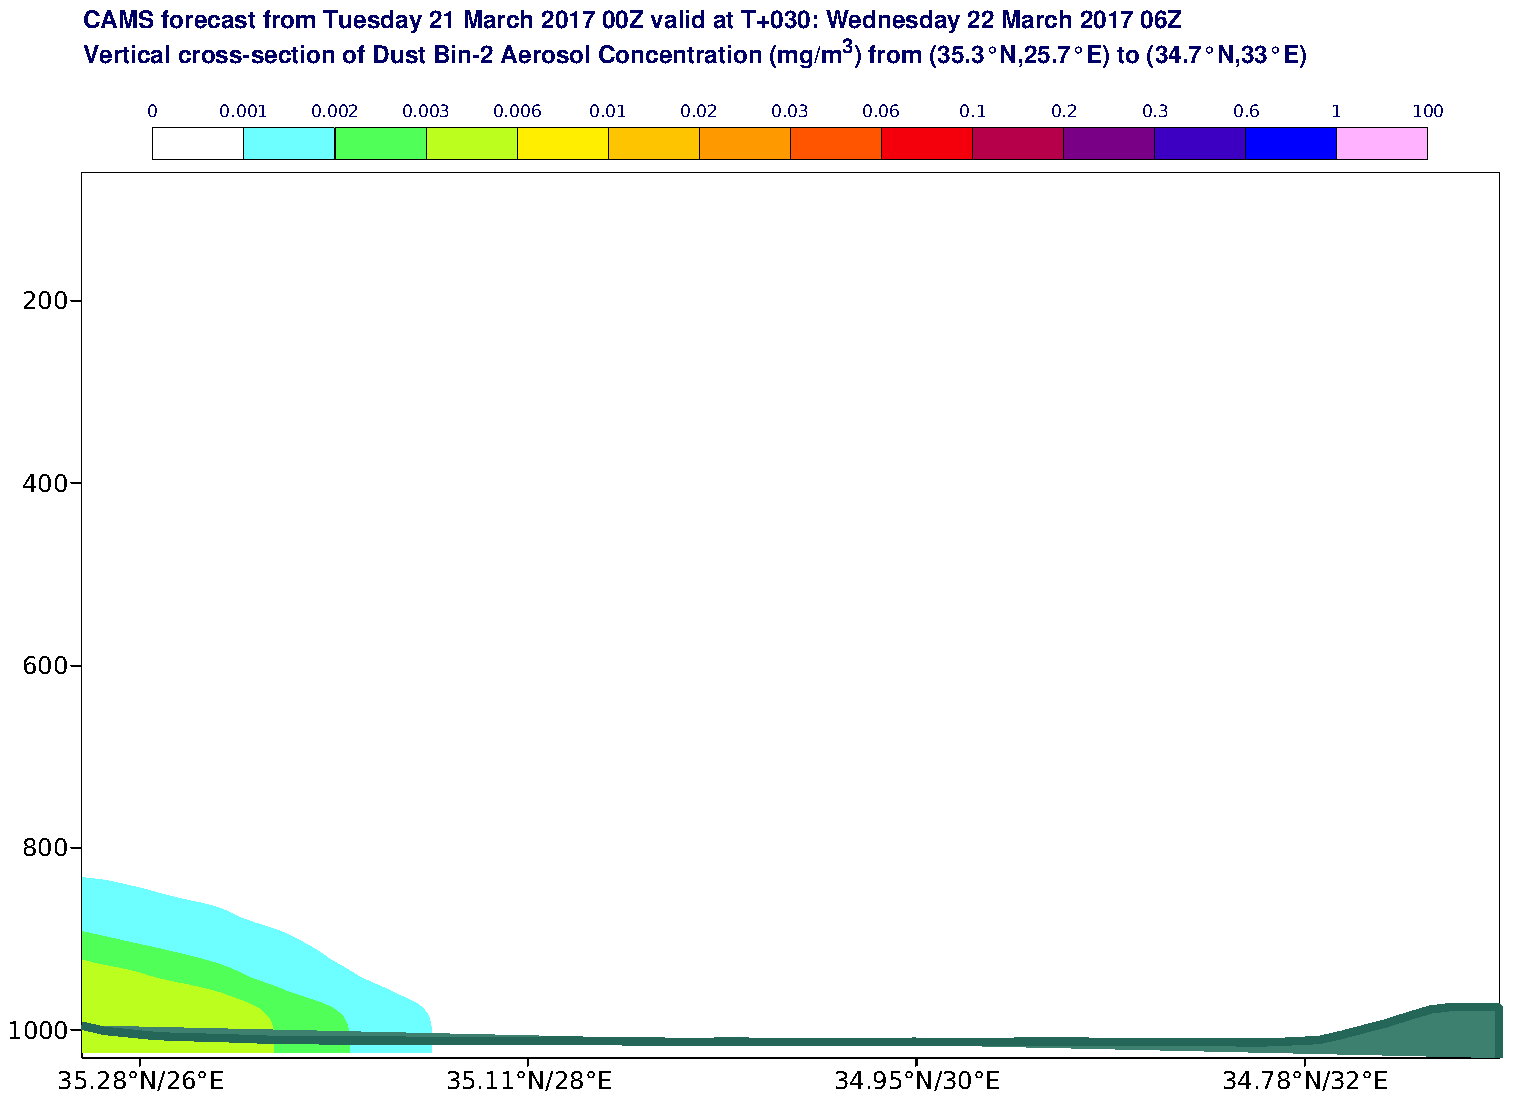 Vertical cross-section of Dust Bin-2 Aerosol Concentration (mg/m3) valid at T30 - 2017-03-22 06:00